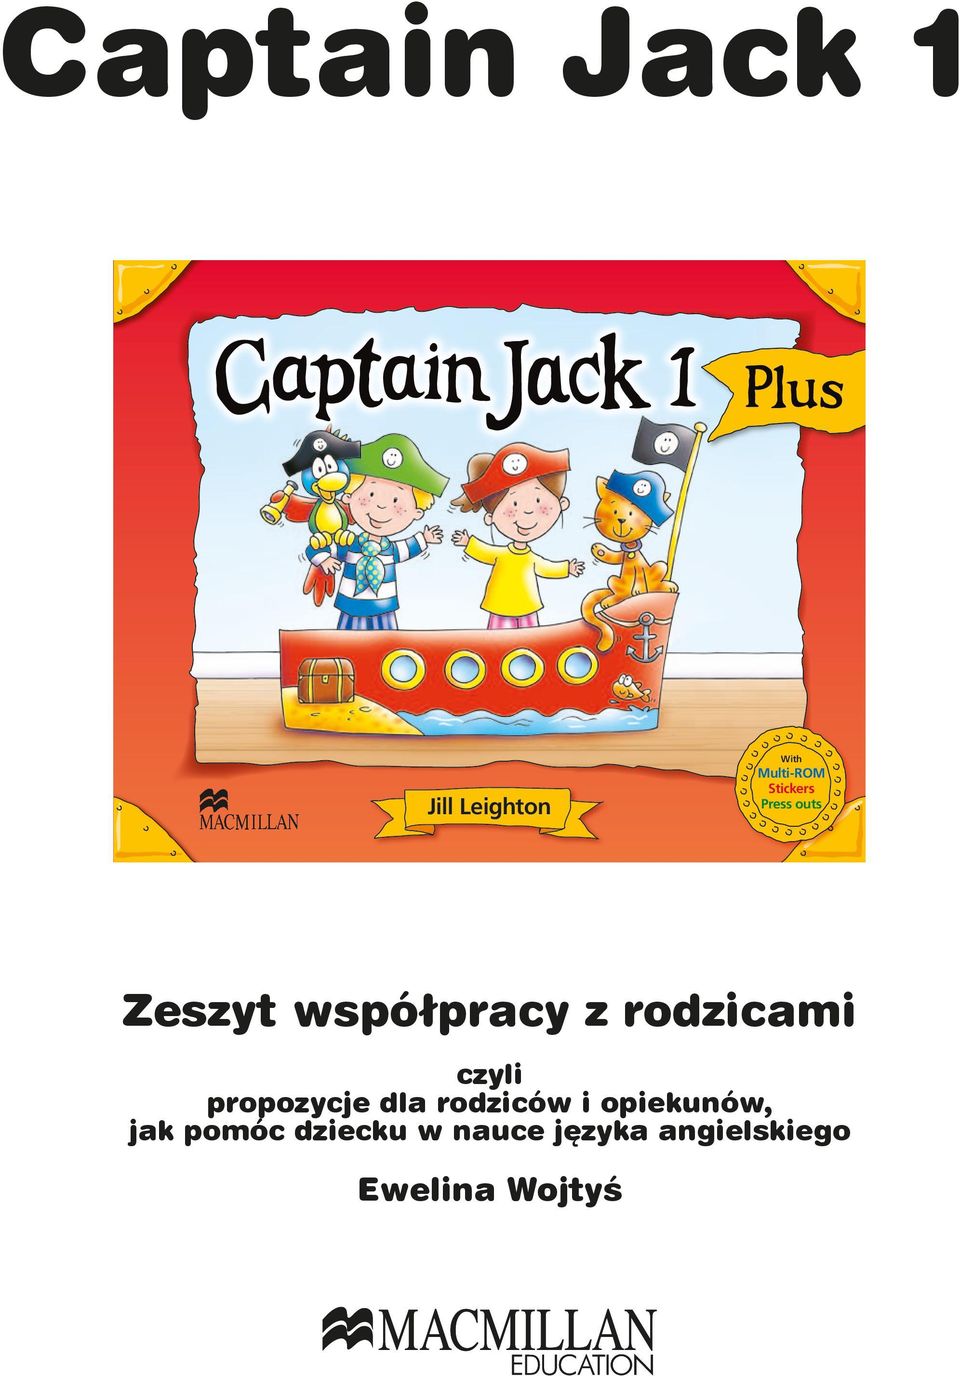 Macmillan Flashcards 2 Publishers Limited 2011 Captain Jack 1 Jill Leighton Limited 2011 15/09/2010 16:23 With Jill Leighton Multi-ROM